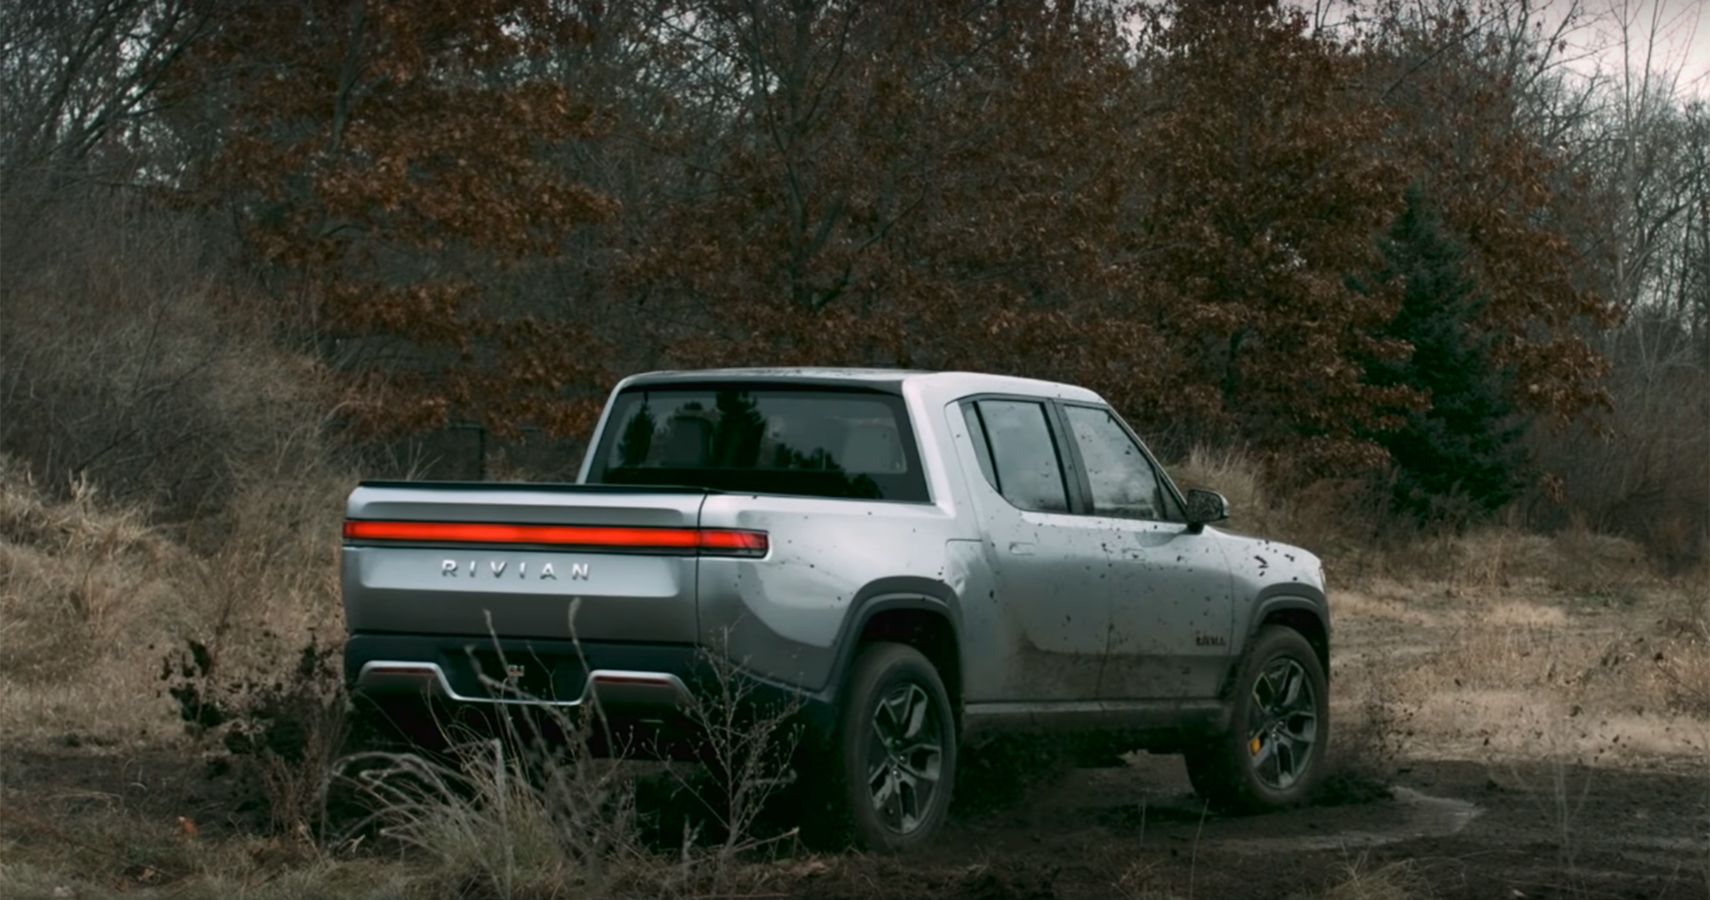 The Rivian Pickup Truck Shows Off Its 'Tank Turn' Feature